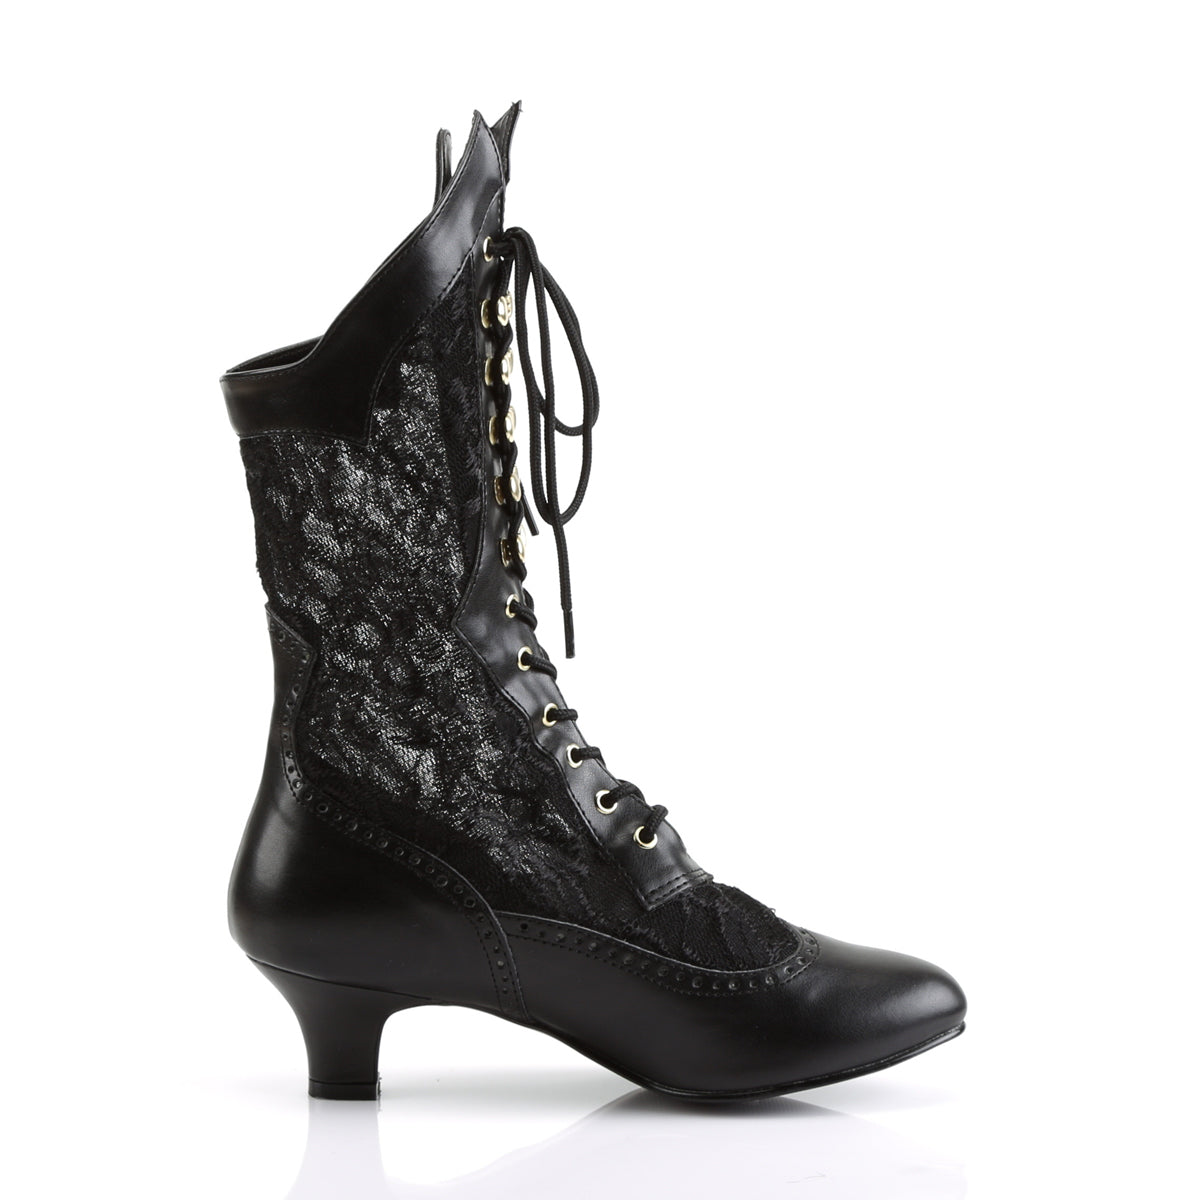 DAME-115 Black Ankle Boots